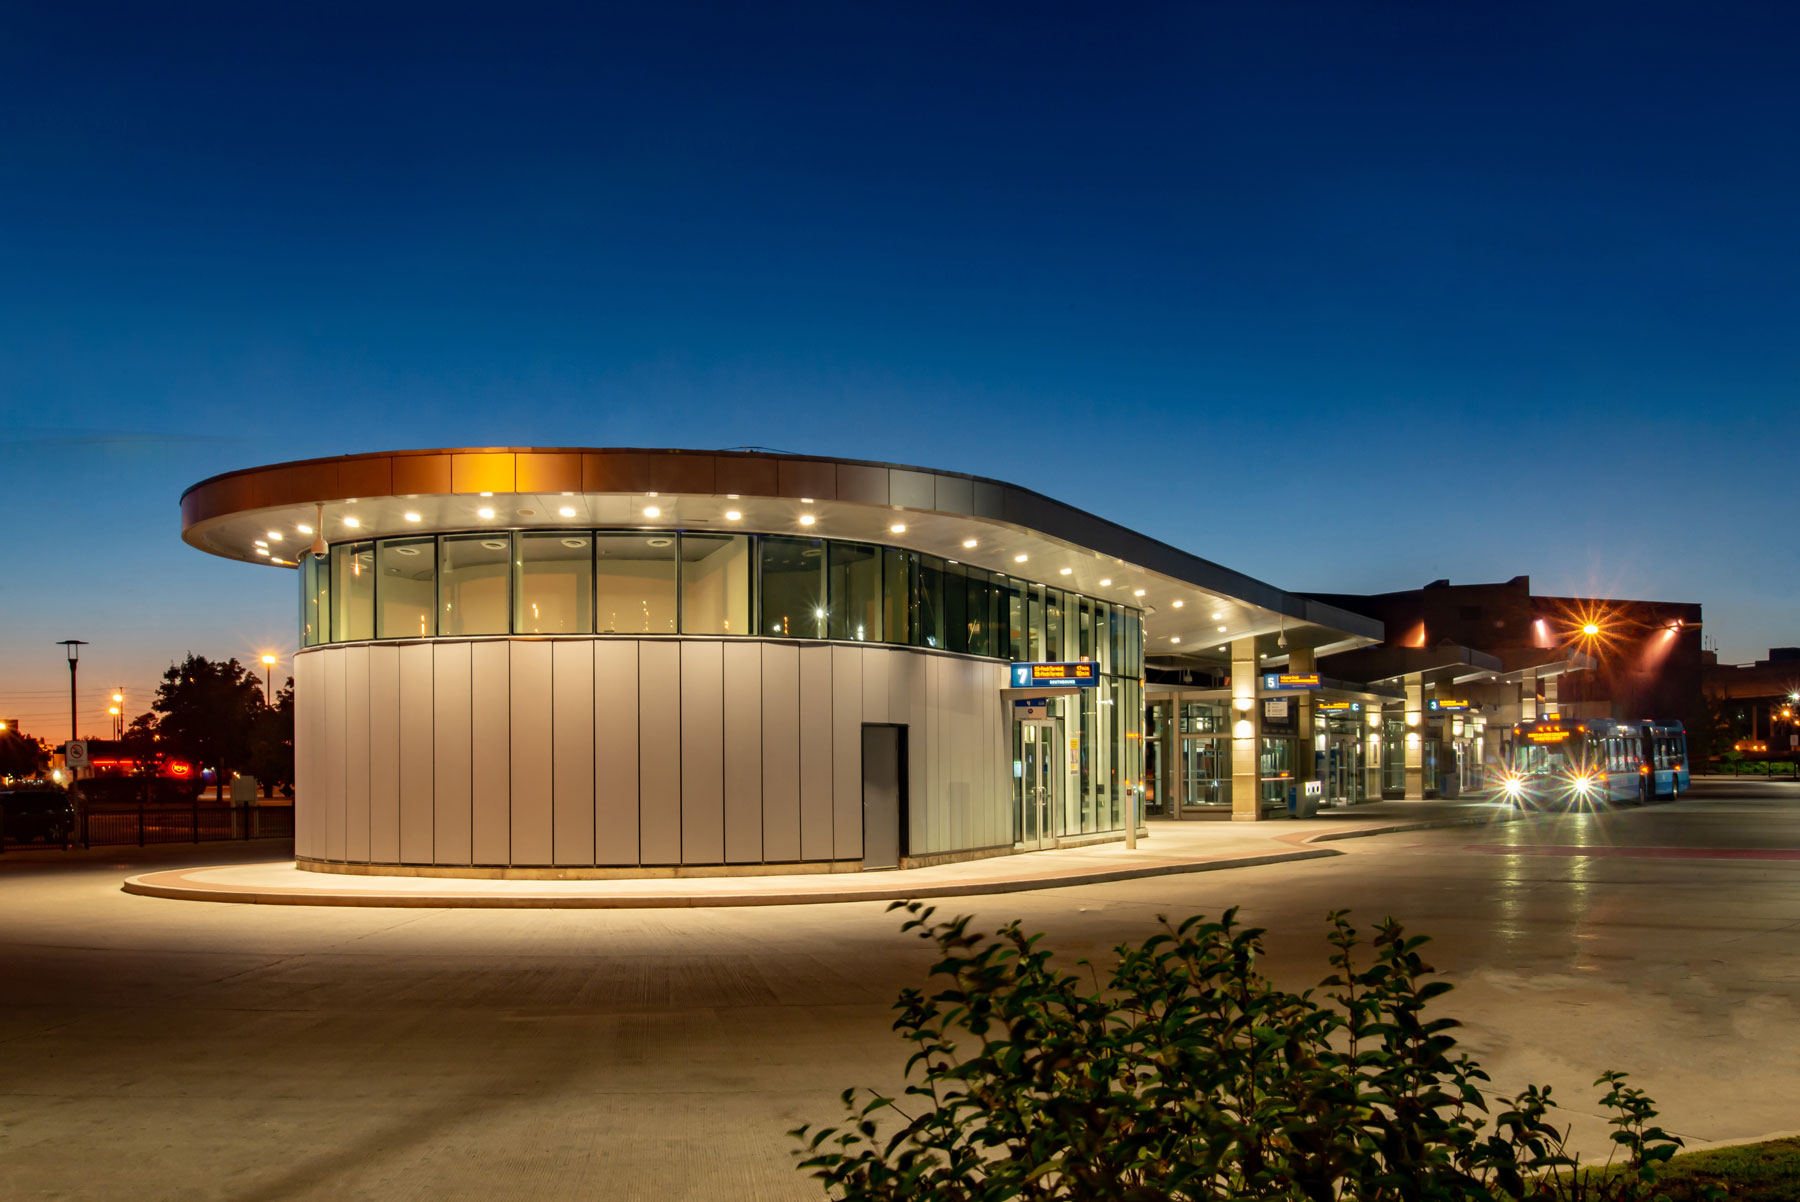 Exterior photo of the bus terminal at night